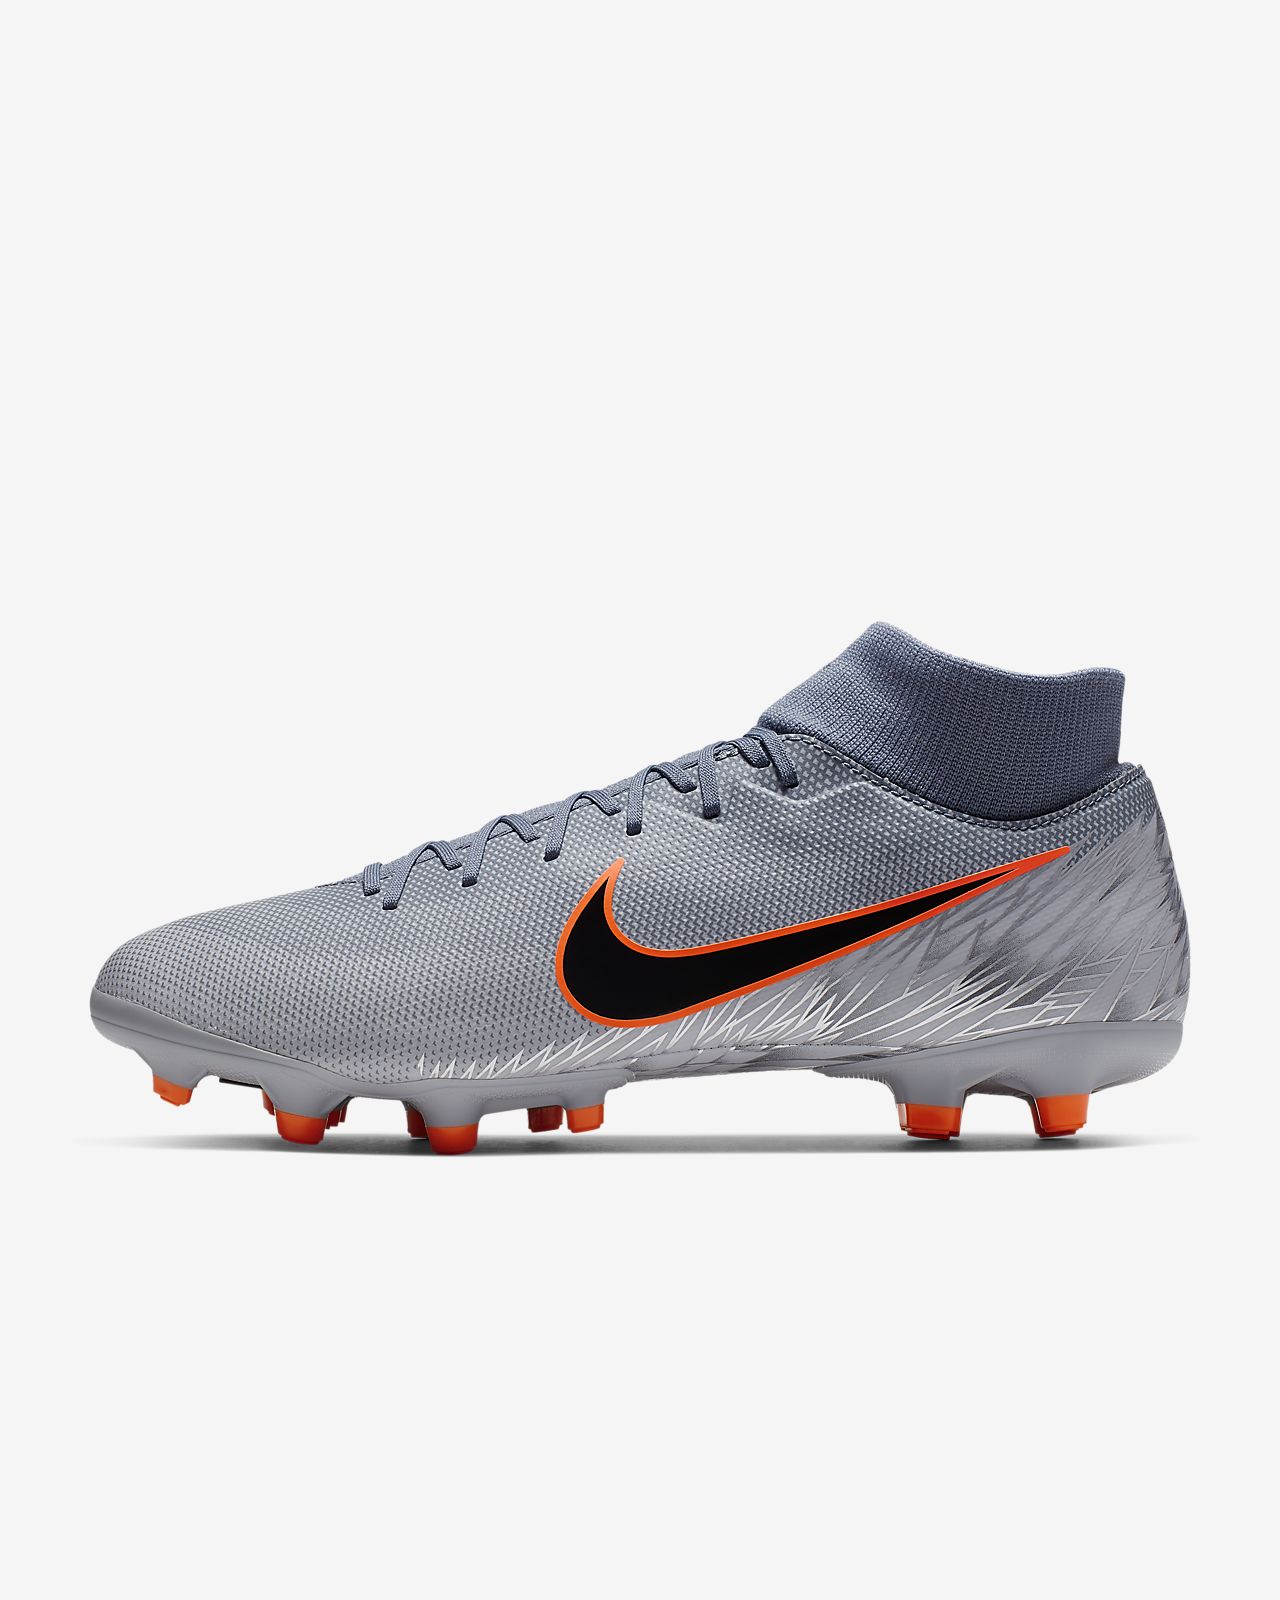 Unboxing and Field Test Nike Mercurial Vapor XII Elite FG 12